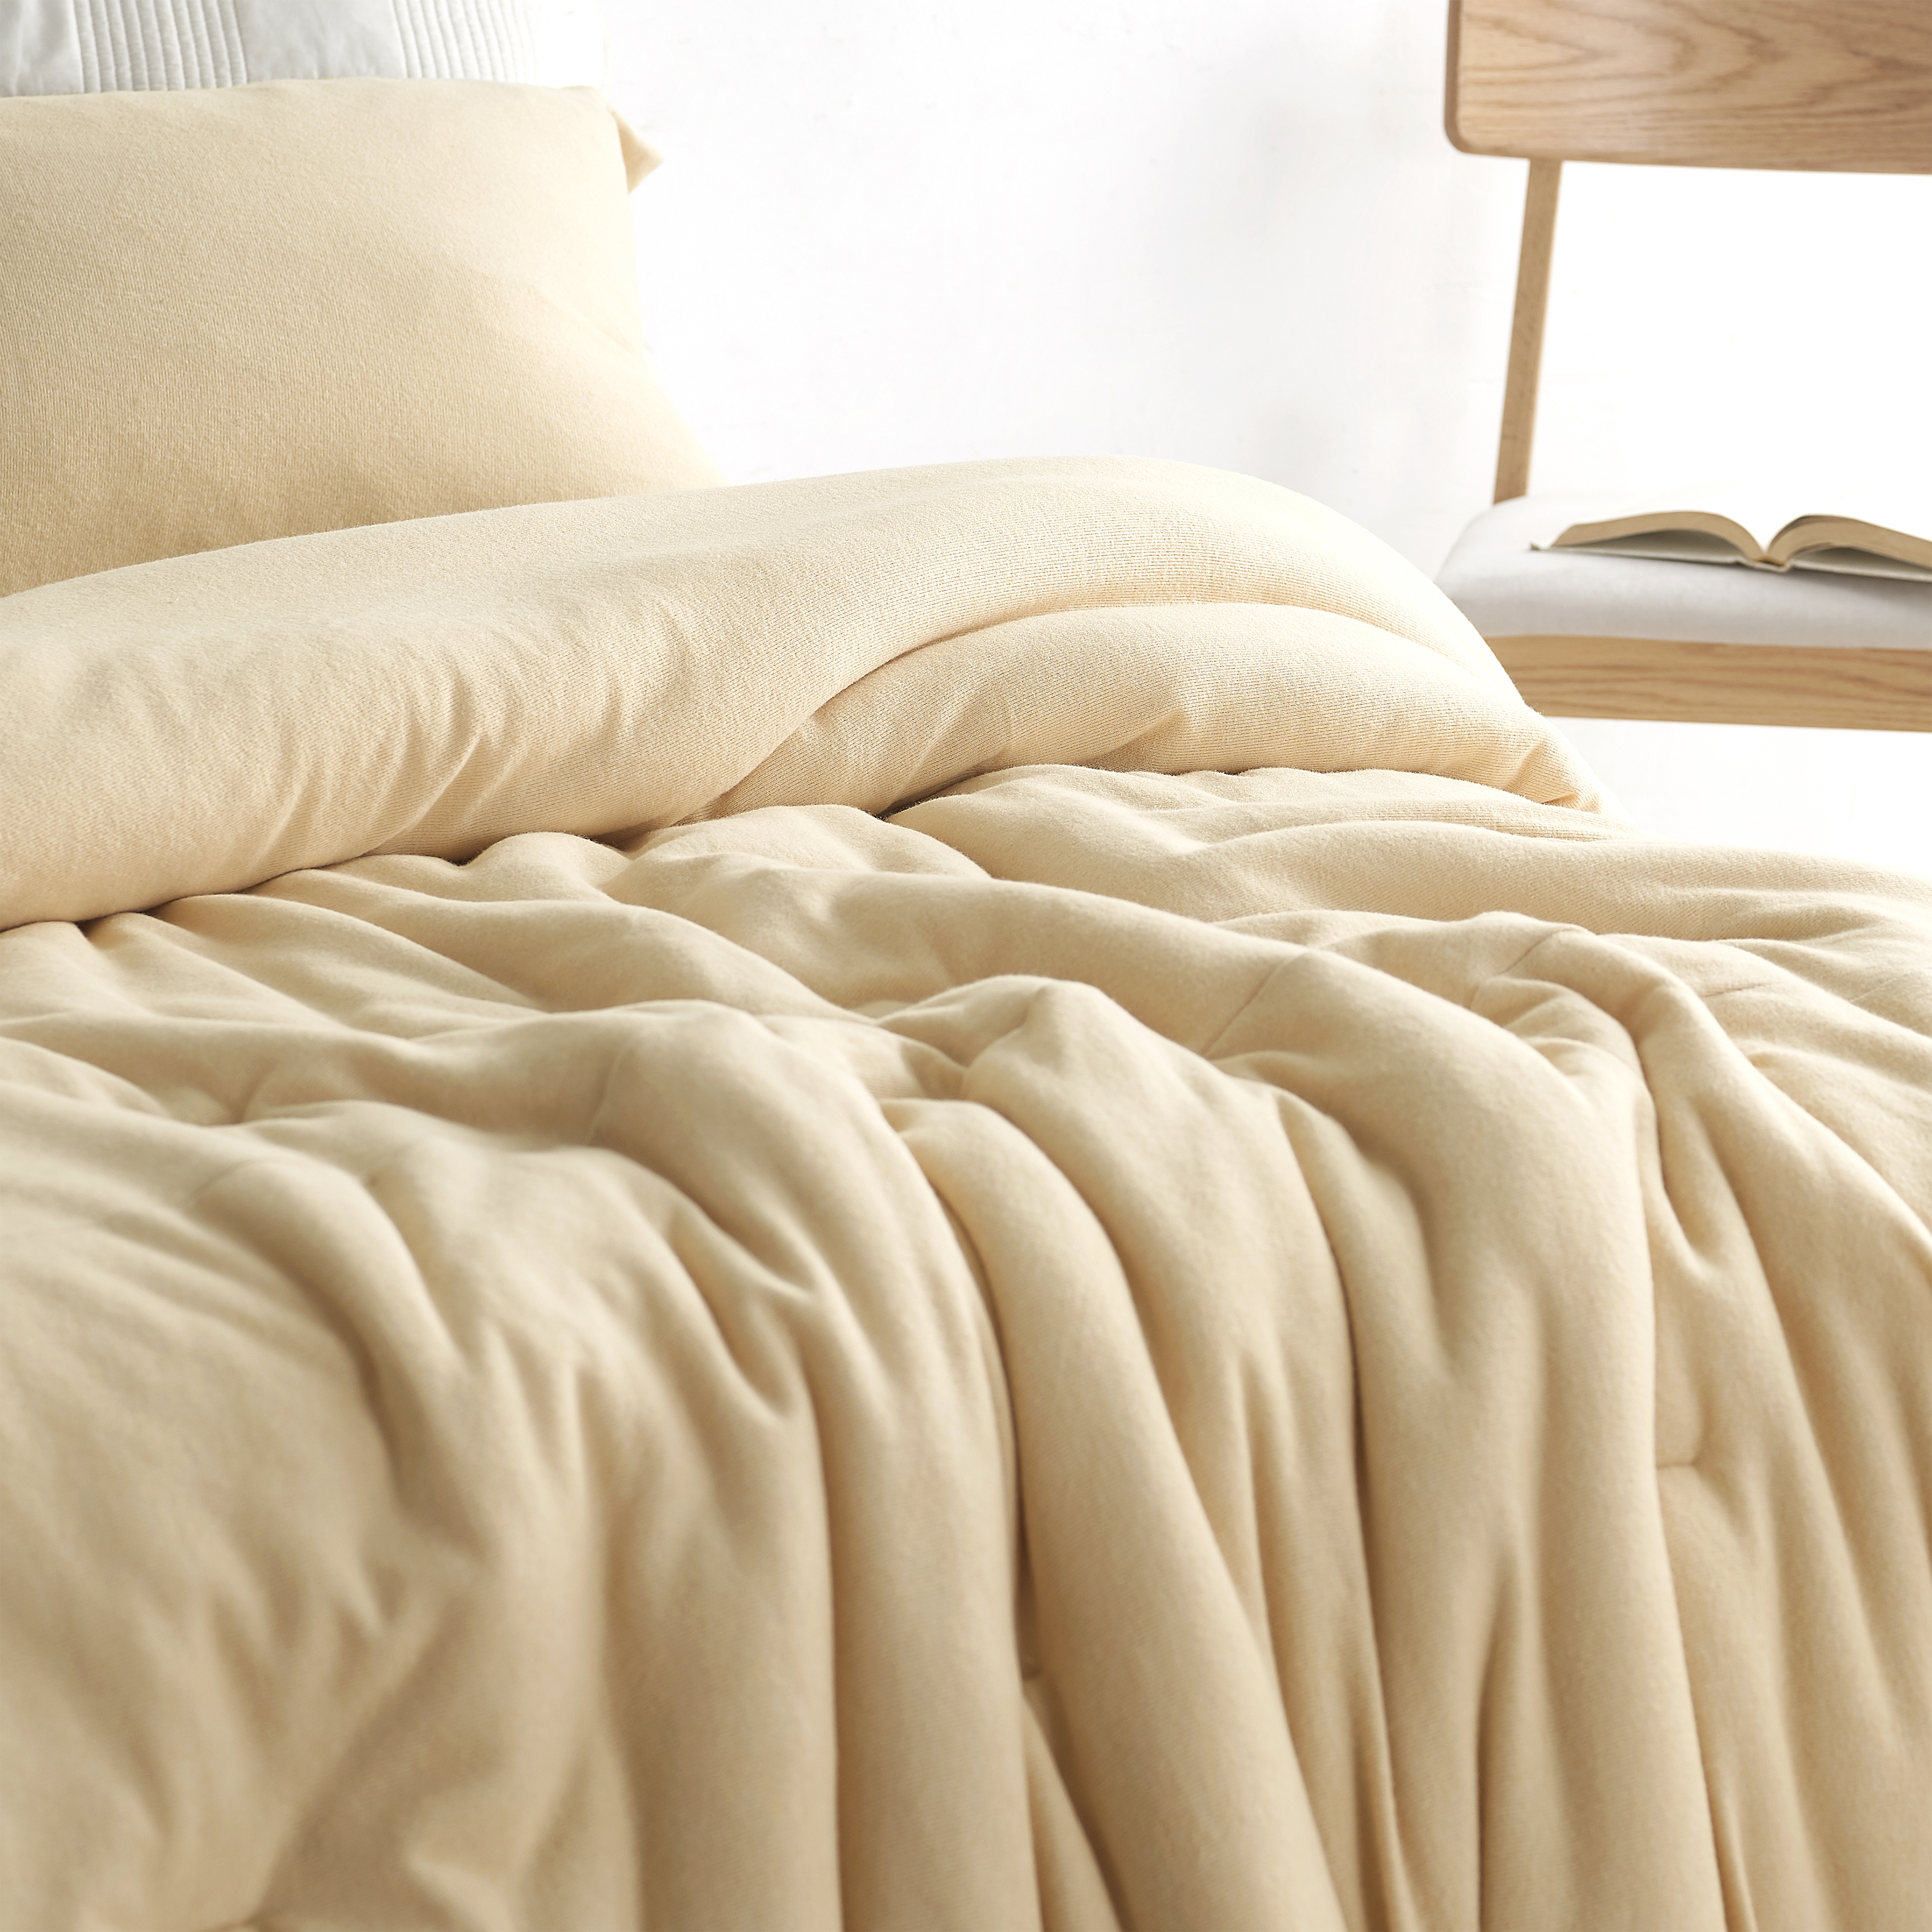 Wool-Ness - Coma Inducer® Oversized Comforter - Gilded Beige